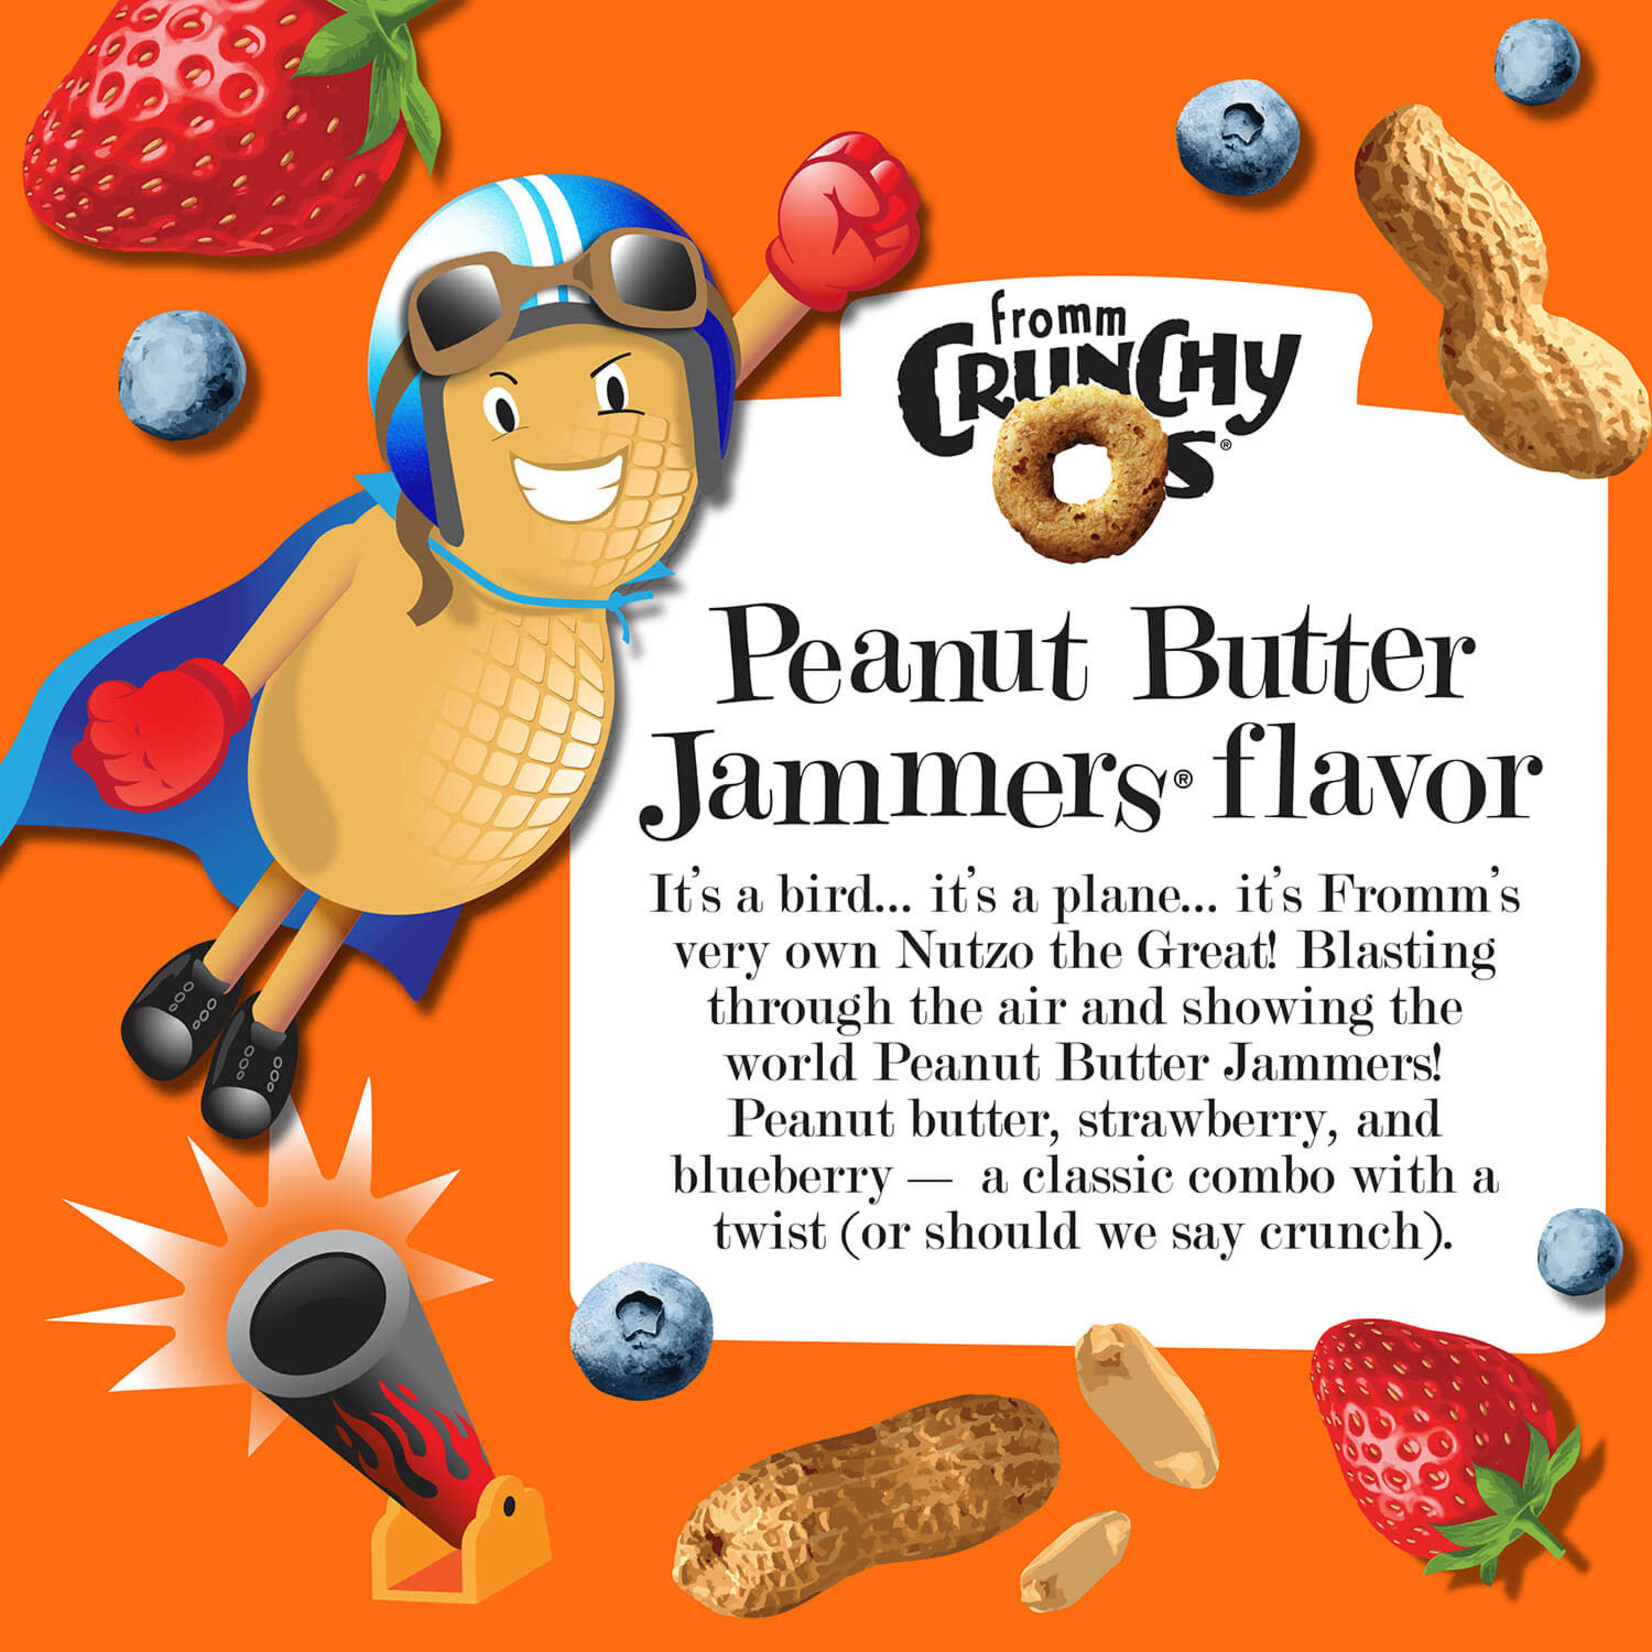 Fromm Crunchy Os Peanut Butter Jammers Flavor Dog Treats